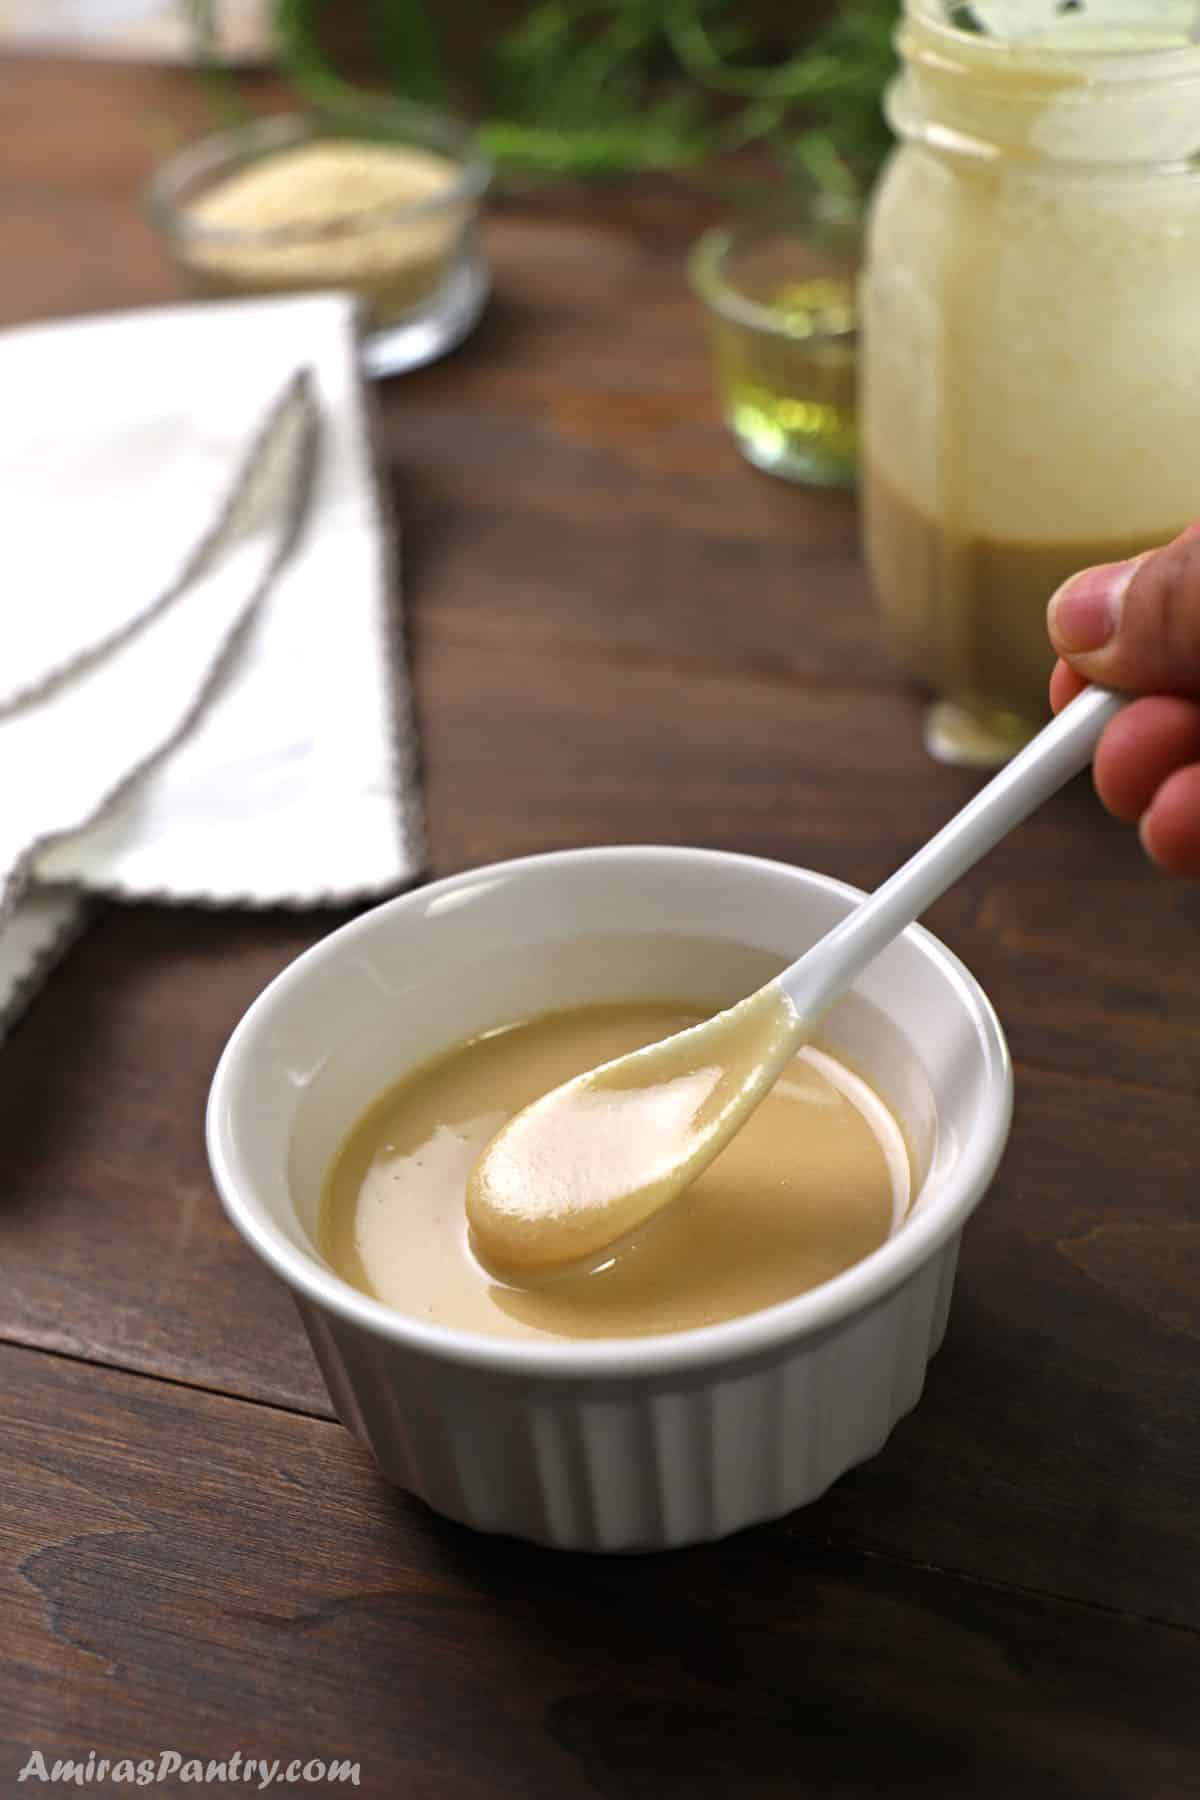 A spoon scooping some freshly made tahini paste out of a small bowl with a jar of tahini in the back.